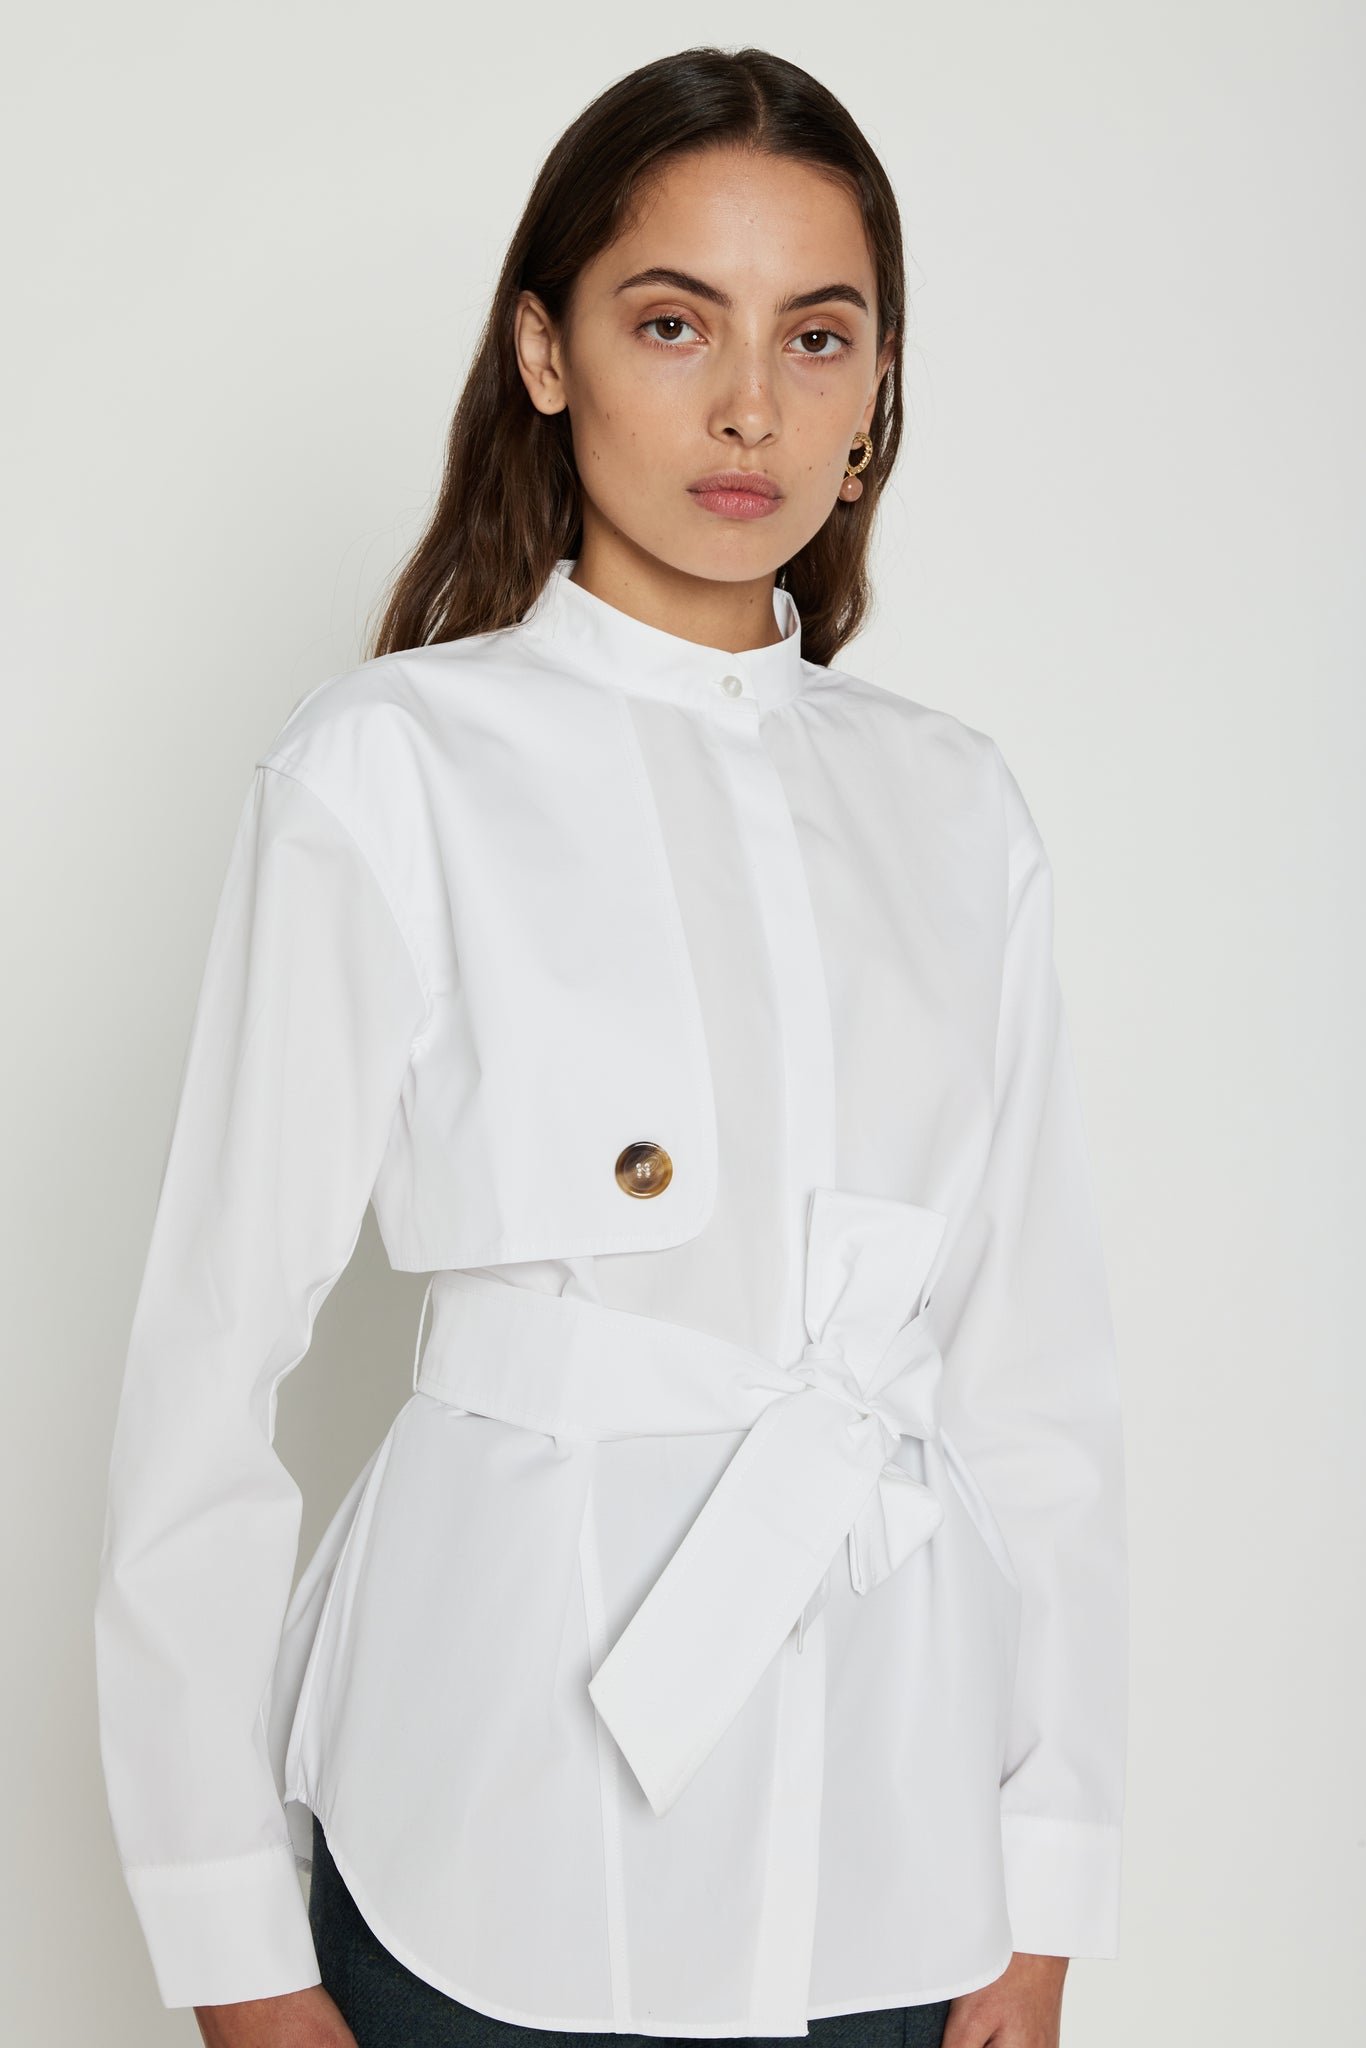 WHITE Shirt with Sleeve & Button detail